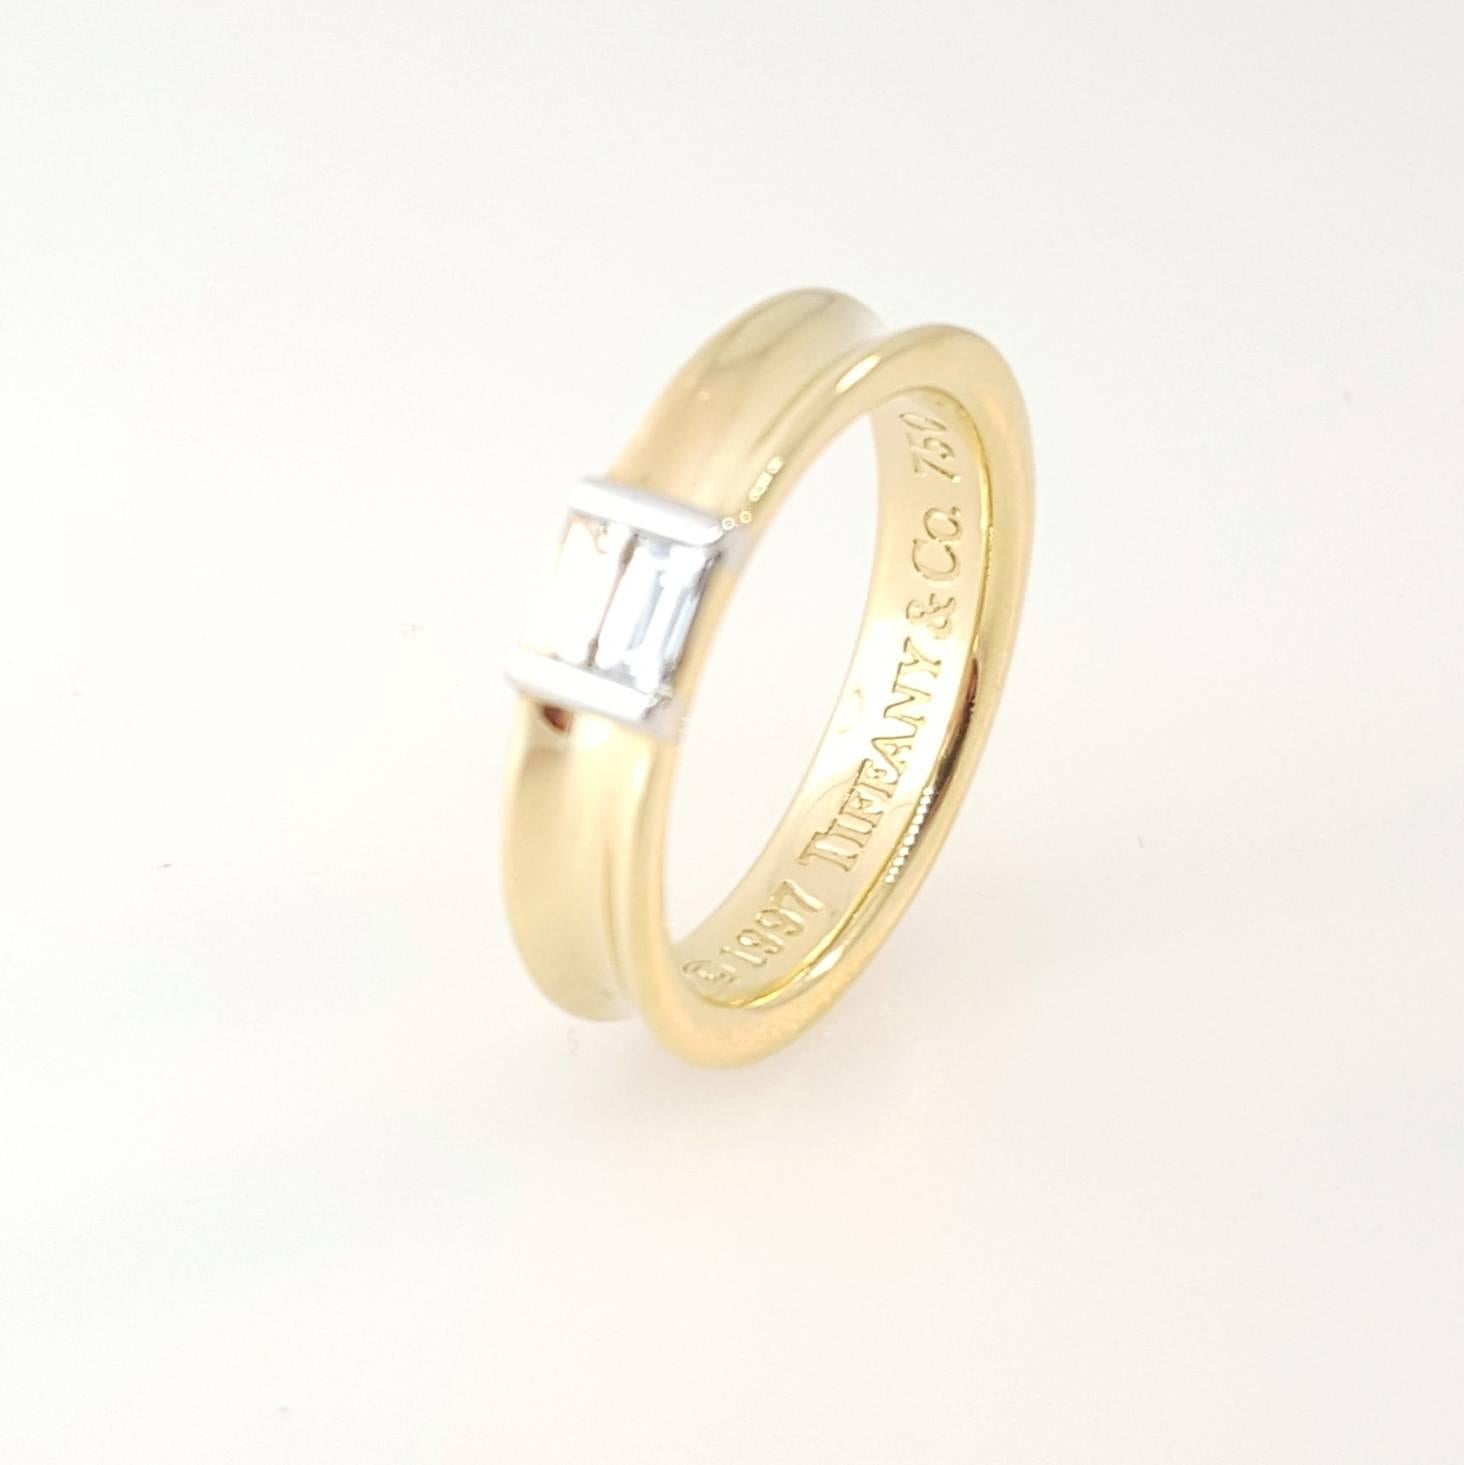 Tiffany & Co. 18 karat yellow gold ring set with 2 Baguette cut diamonds. The diamonds are bar set and weigh 0.25cttw. The ring is stamped on the inside 1997 Tiffany & Co. 750. The ring is a size 6 and is not resizable.